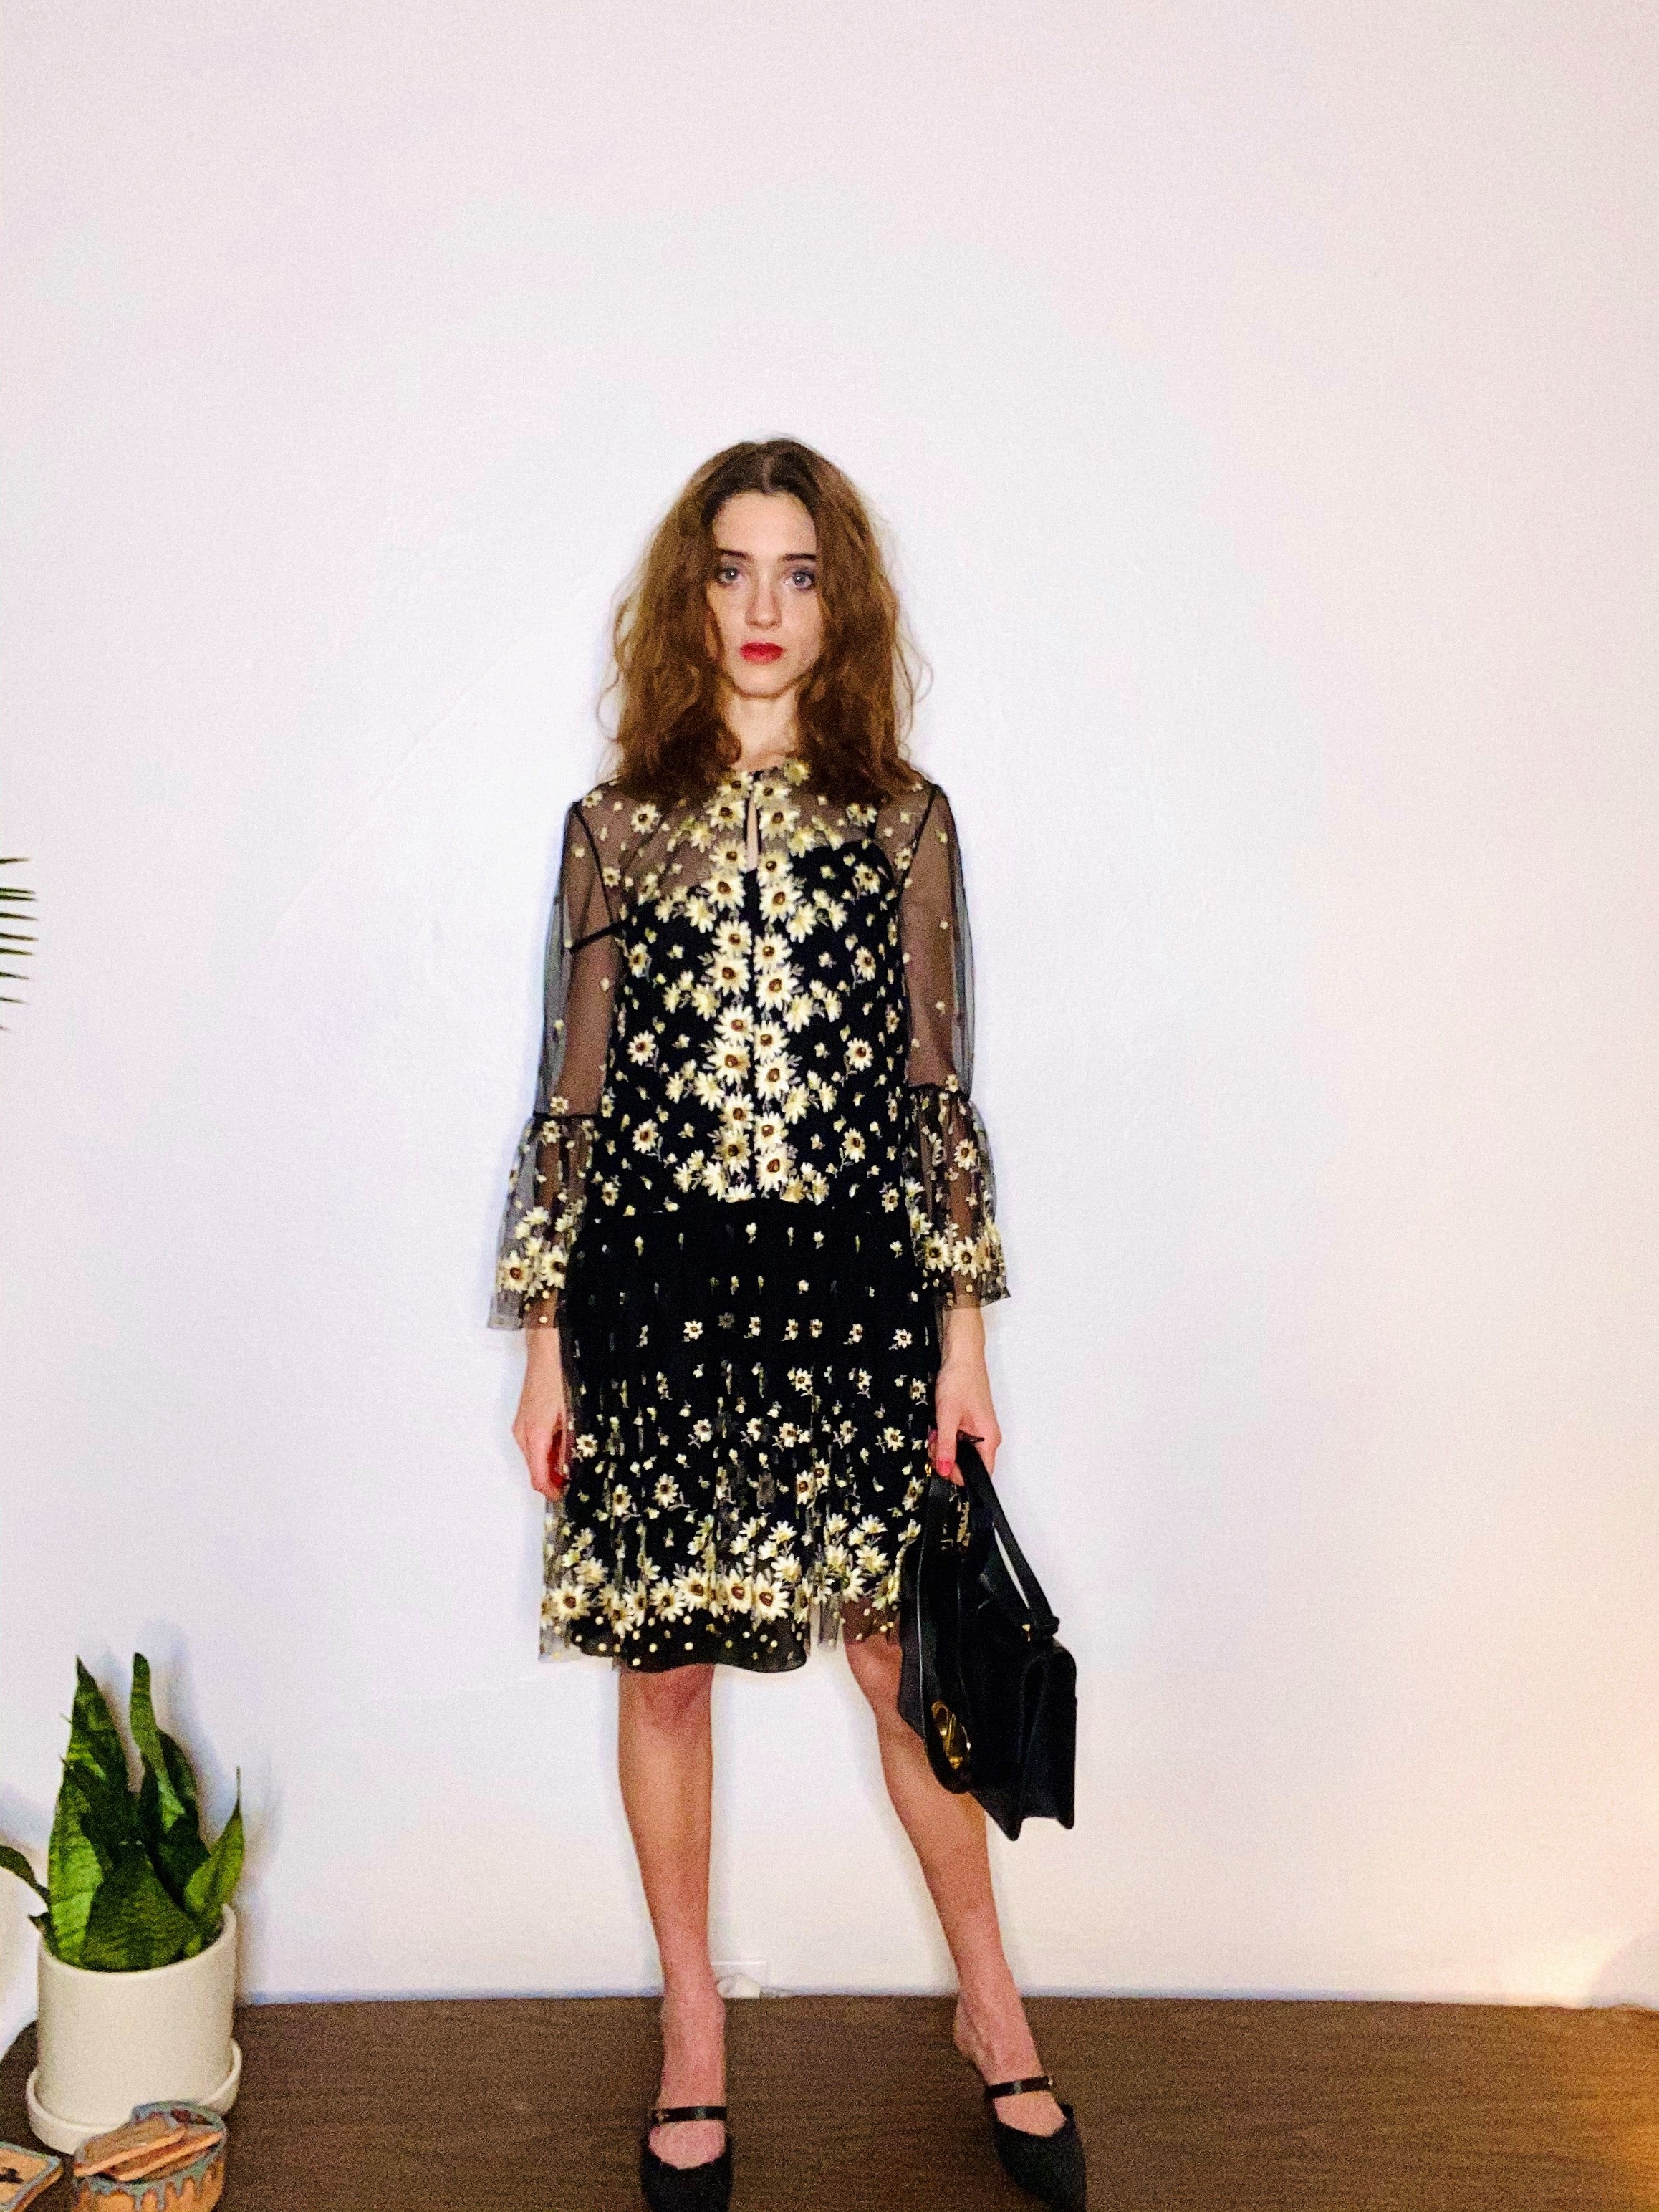 Emma Chamberlain in Black Dress & Mary Janes at Louis Vuitton